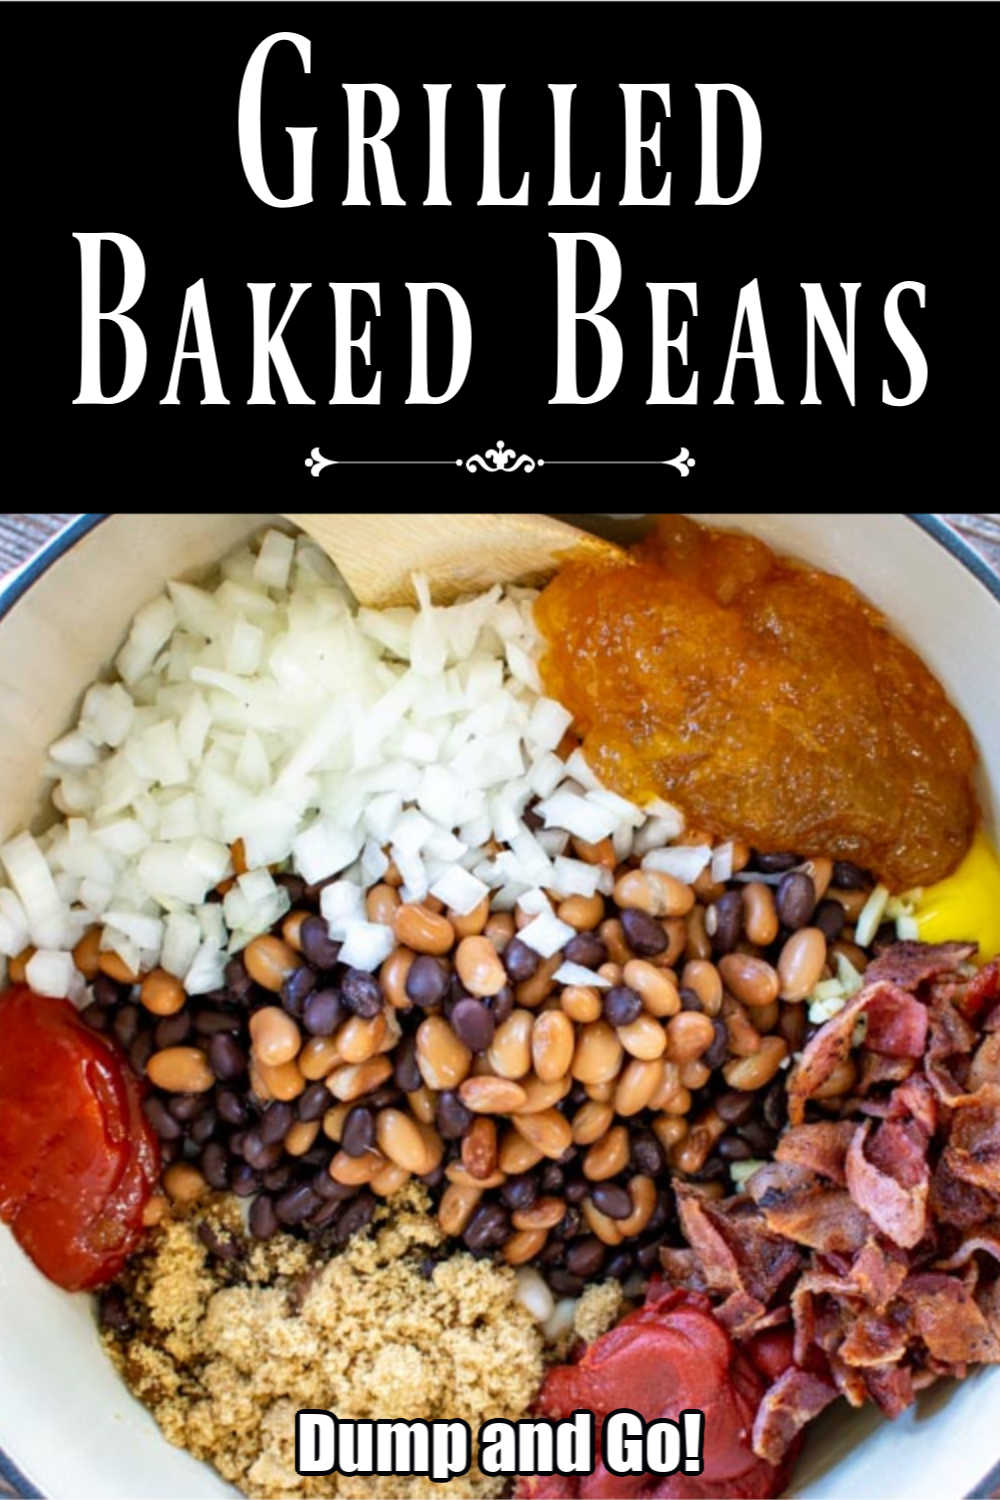 Grilled Bourbon Peach Baked Beans {10 Minutes Prep}